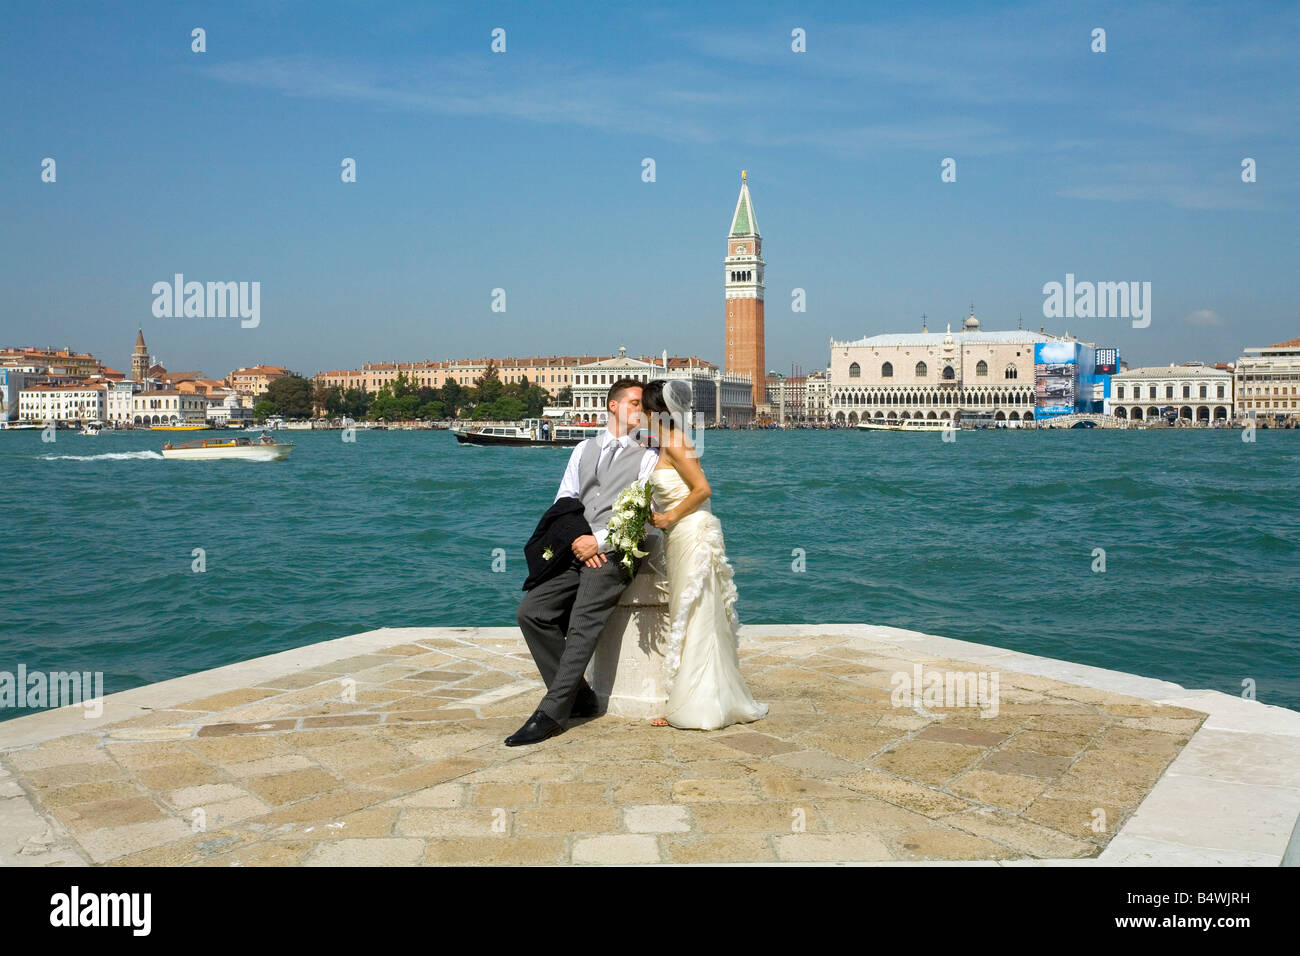 Getting married in Venice Italy Stock Photo